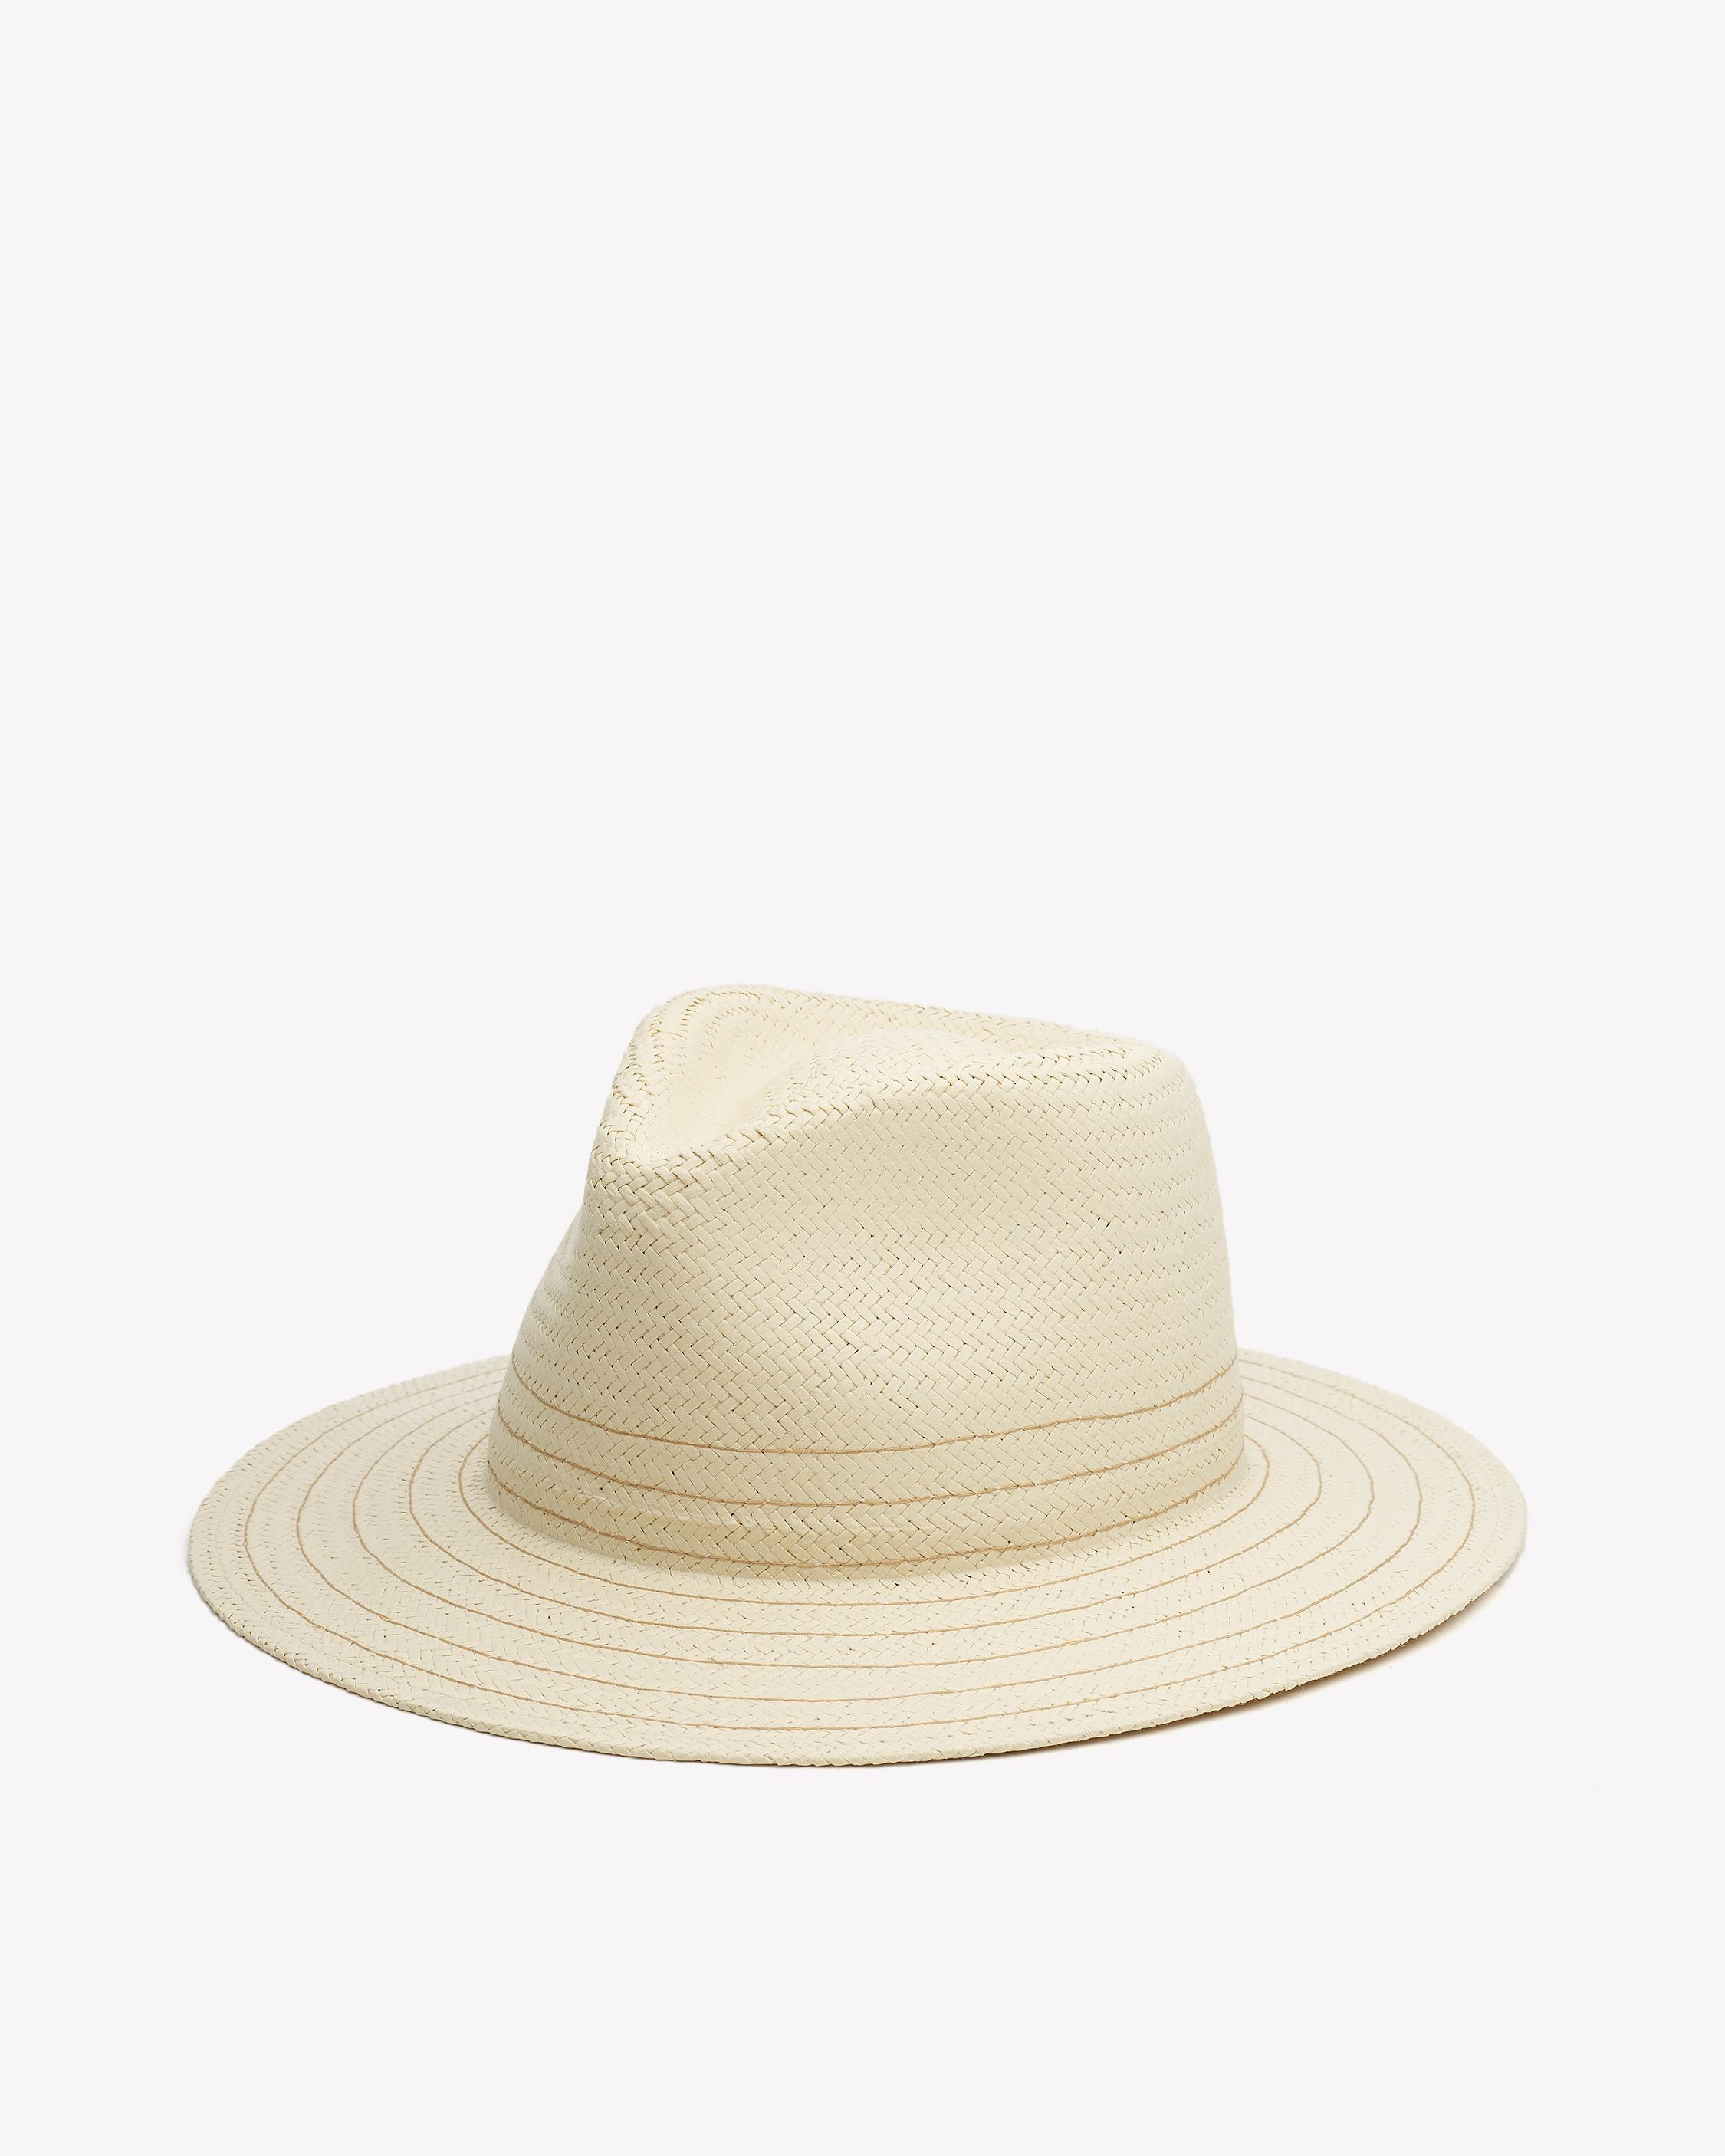 Fedoras Hats in Suede & Leather with Urban Style | rag & bone